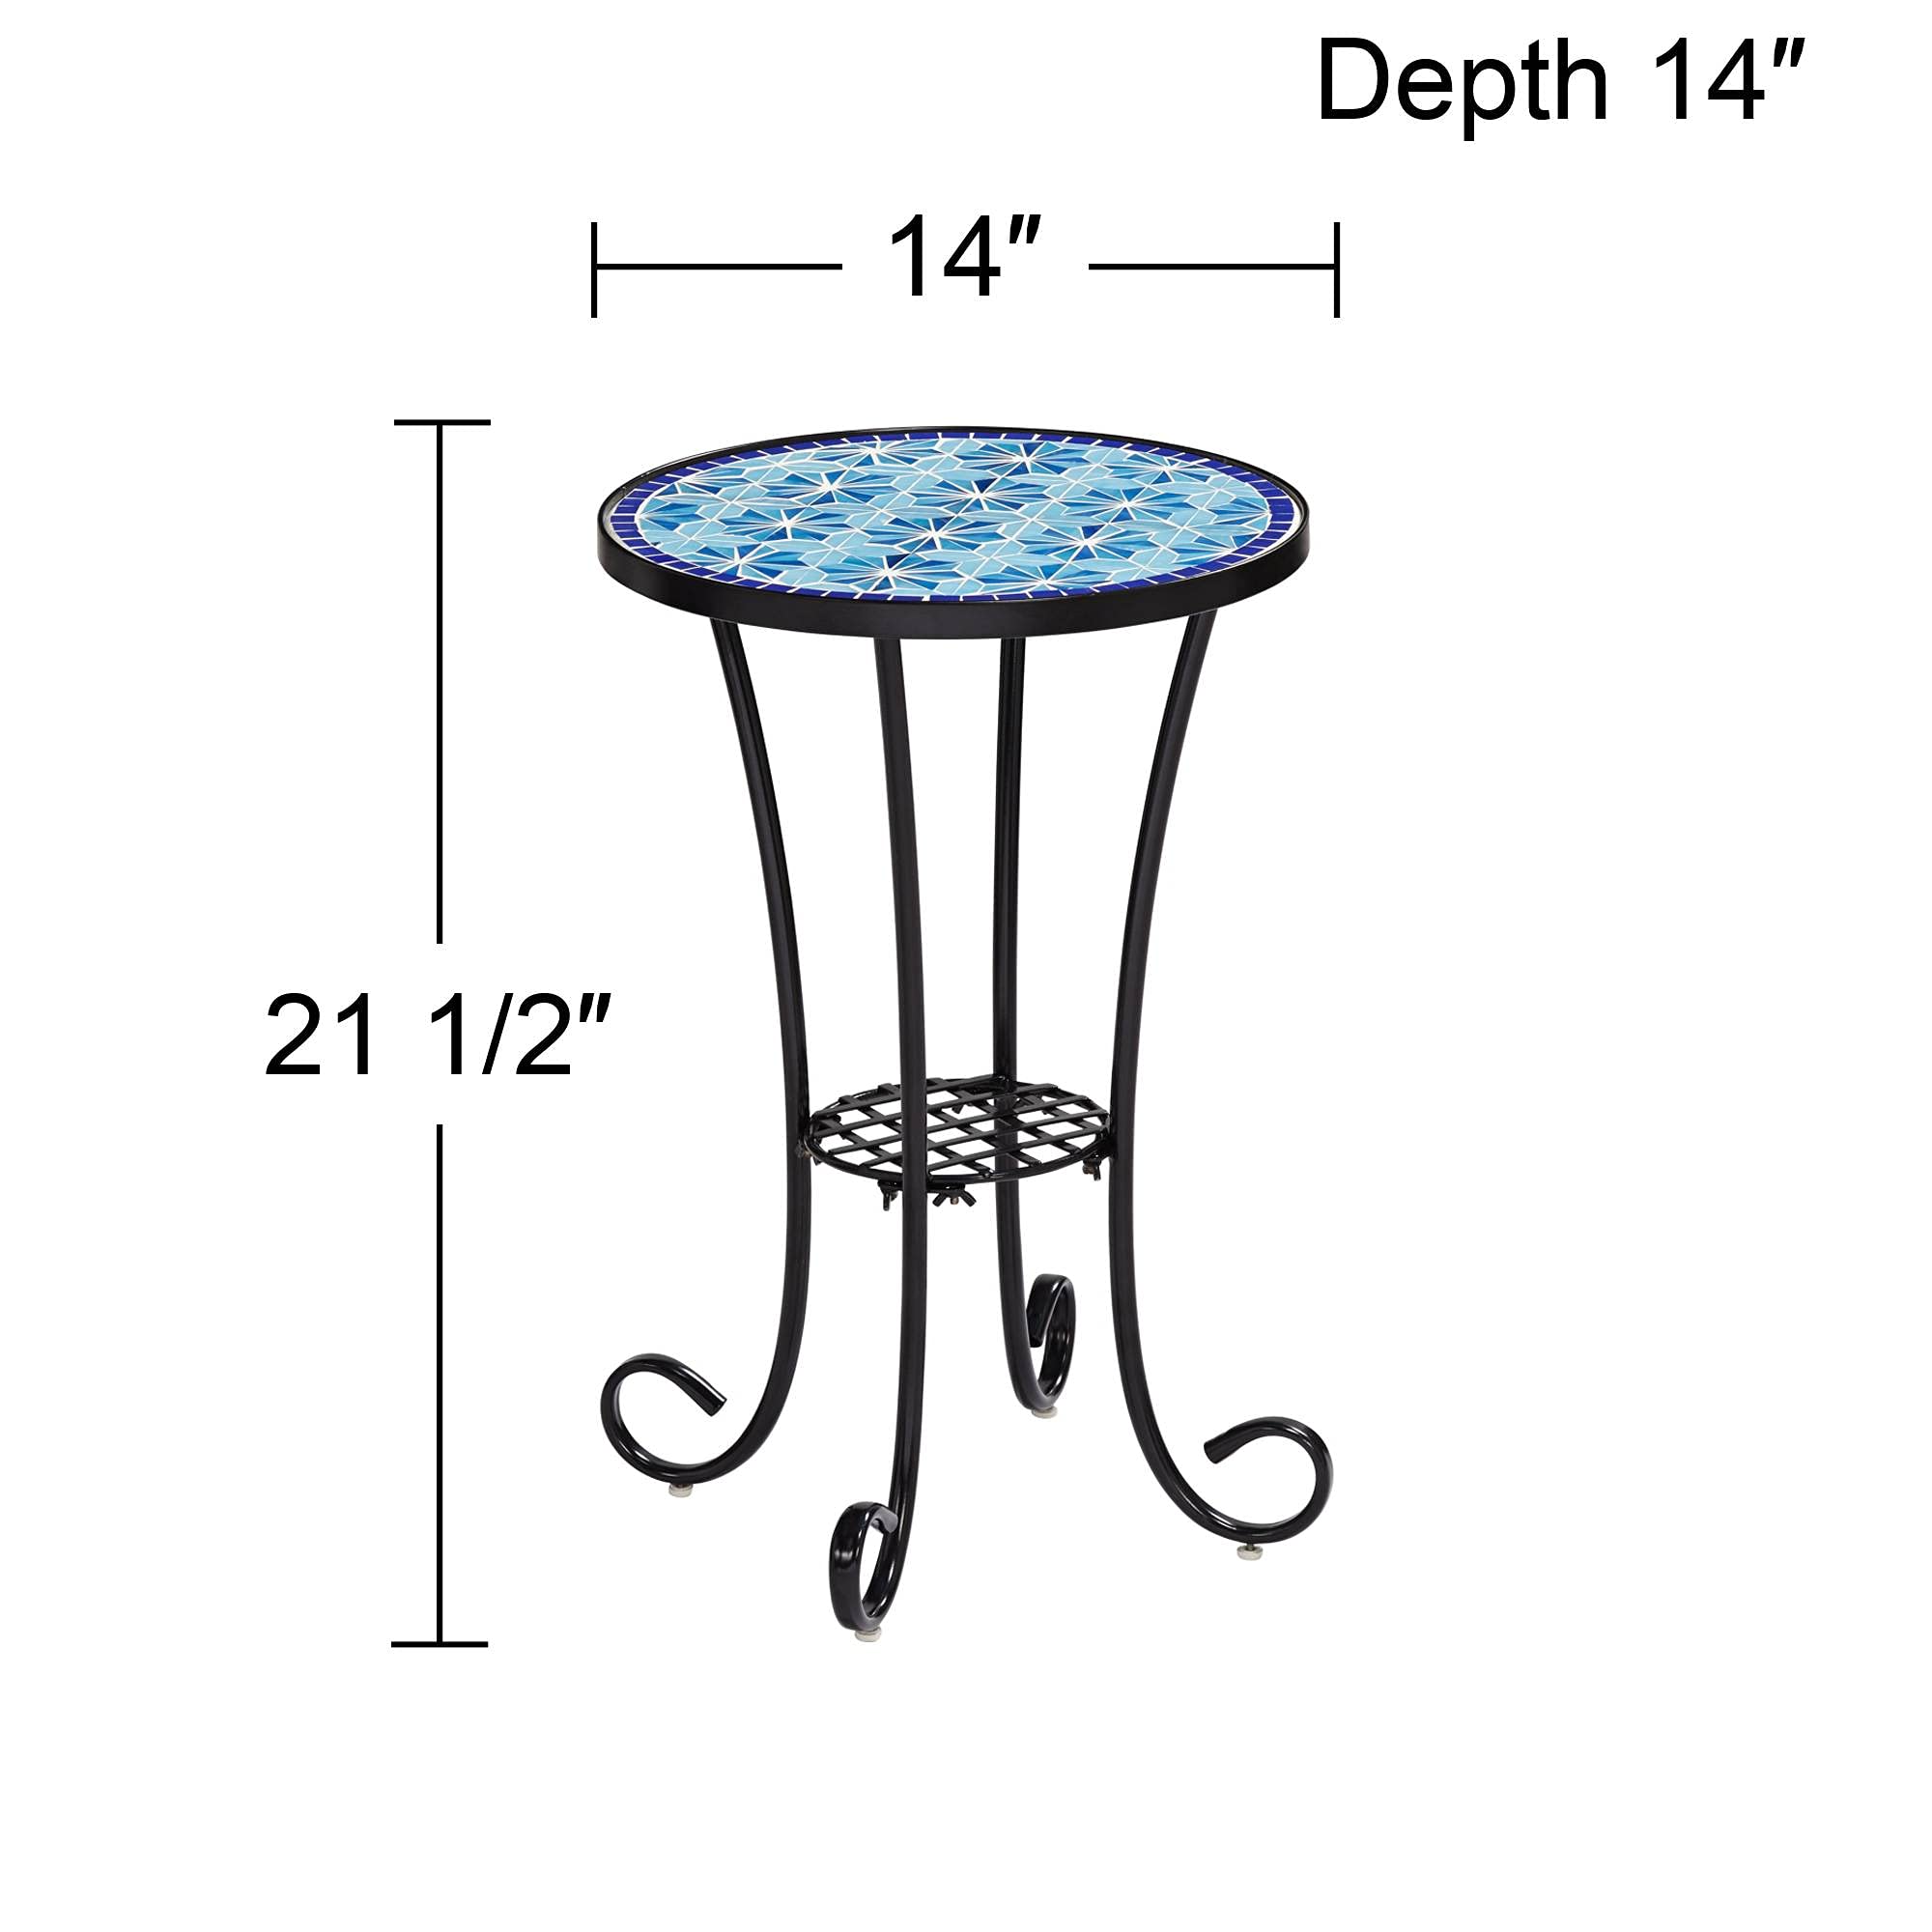 Teal Island Designs Blue Star Modern Black Metal Round Outdoor Accent Side Table 14" Wide with Lower Shelf Mosaic Tabletop Gracefully Curved Legs for Porch Patio Home House Balcony Spaces Deck